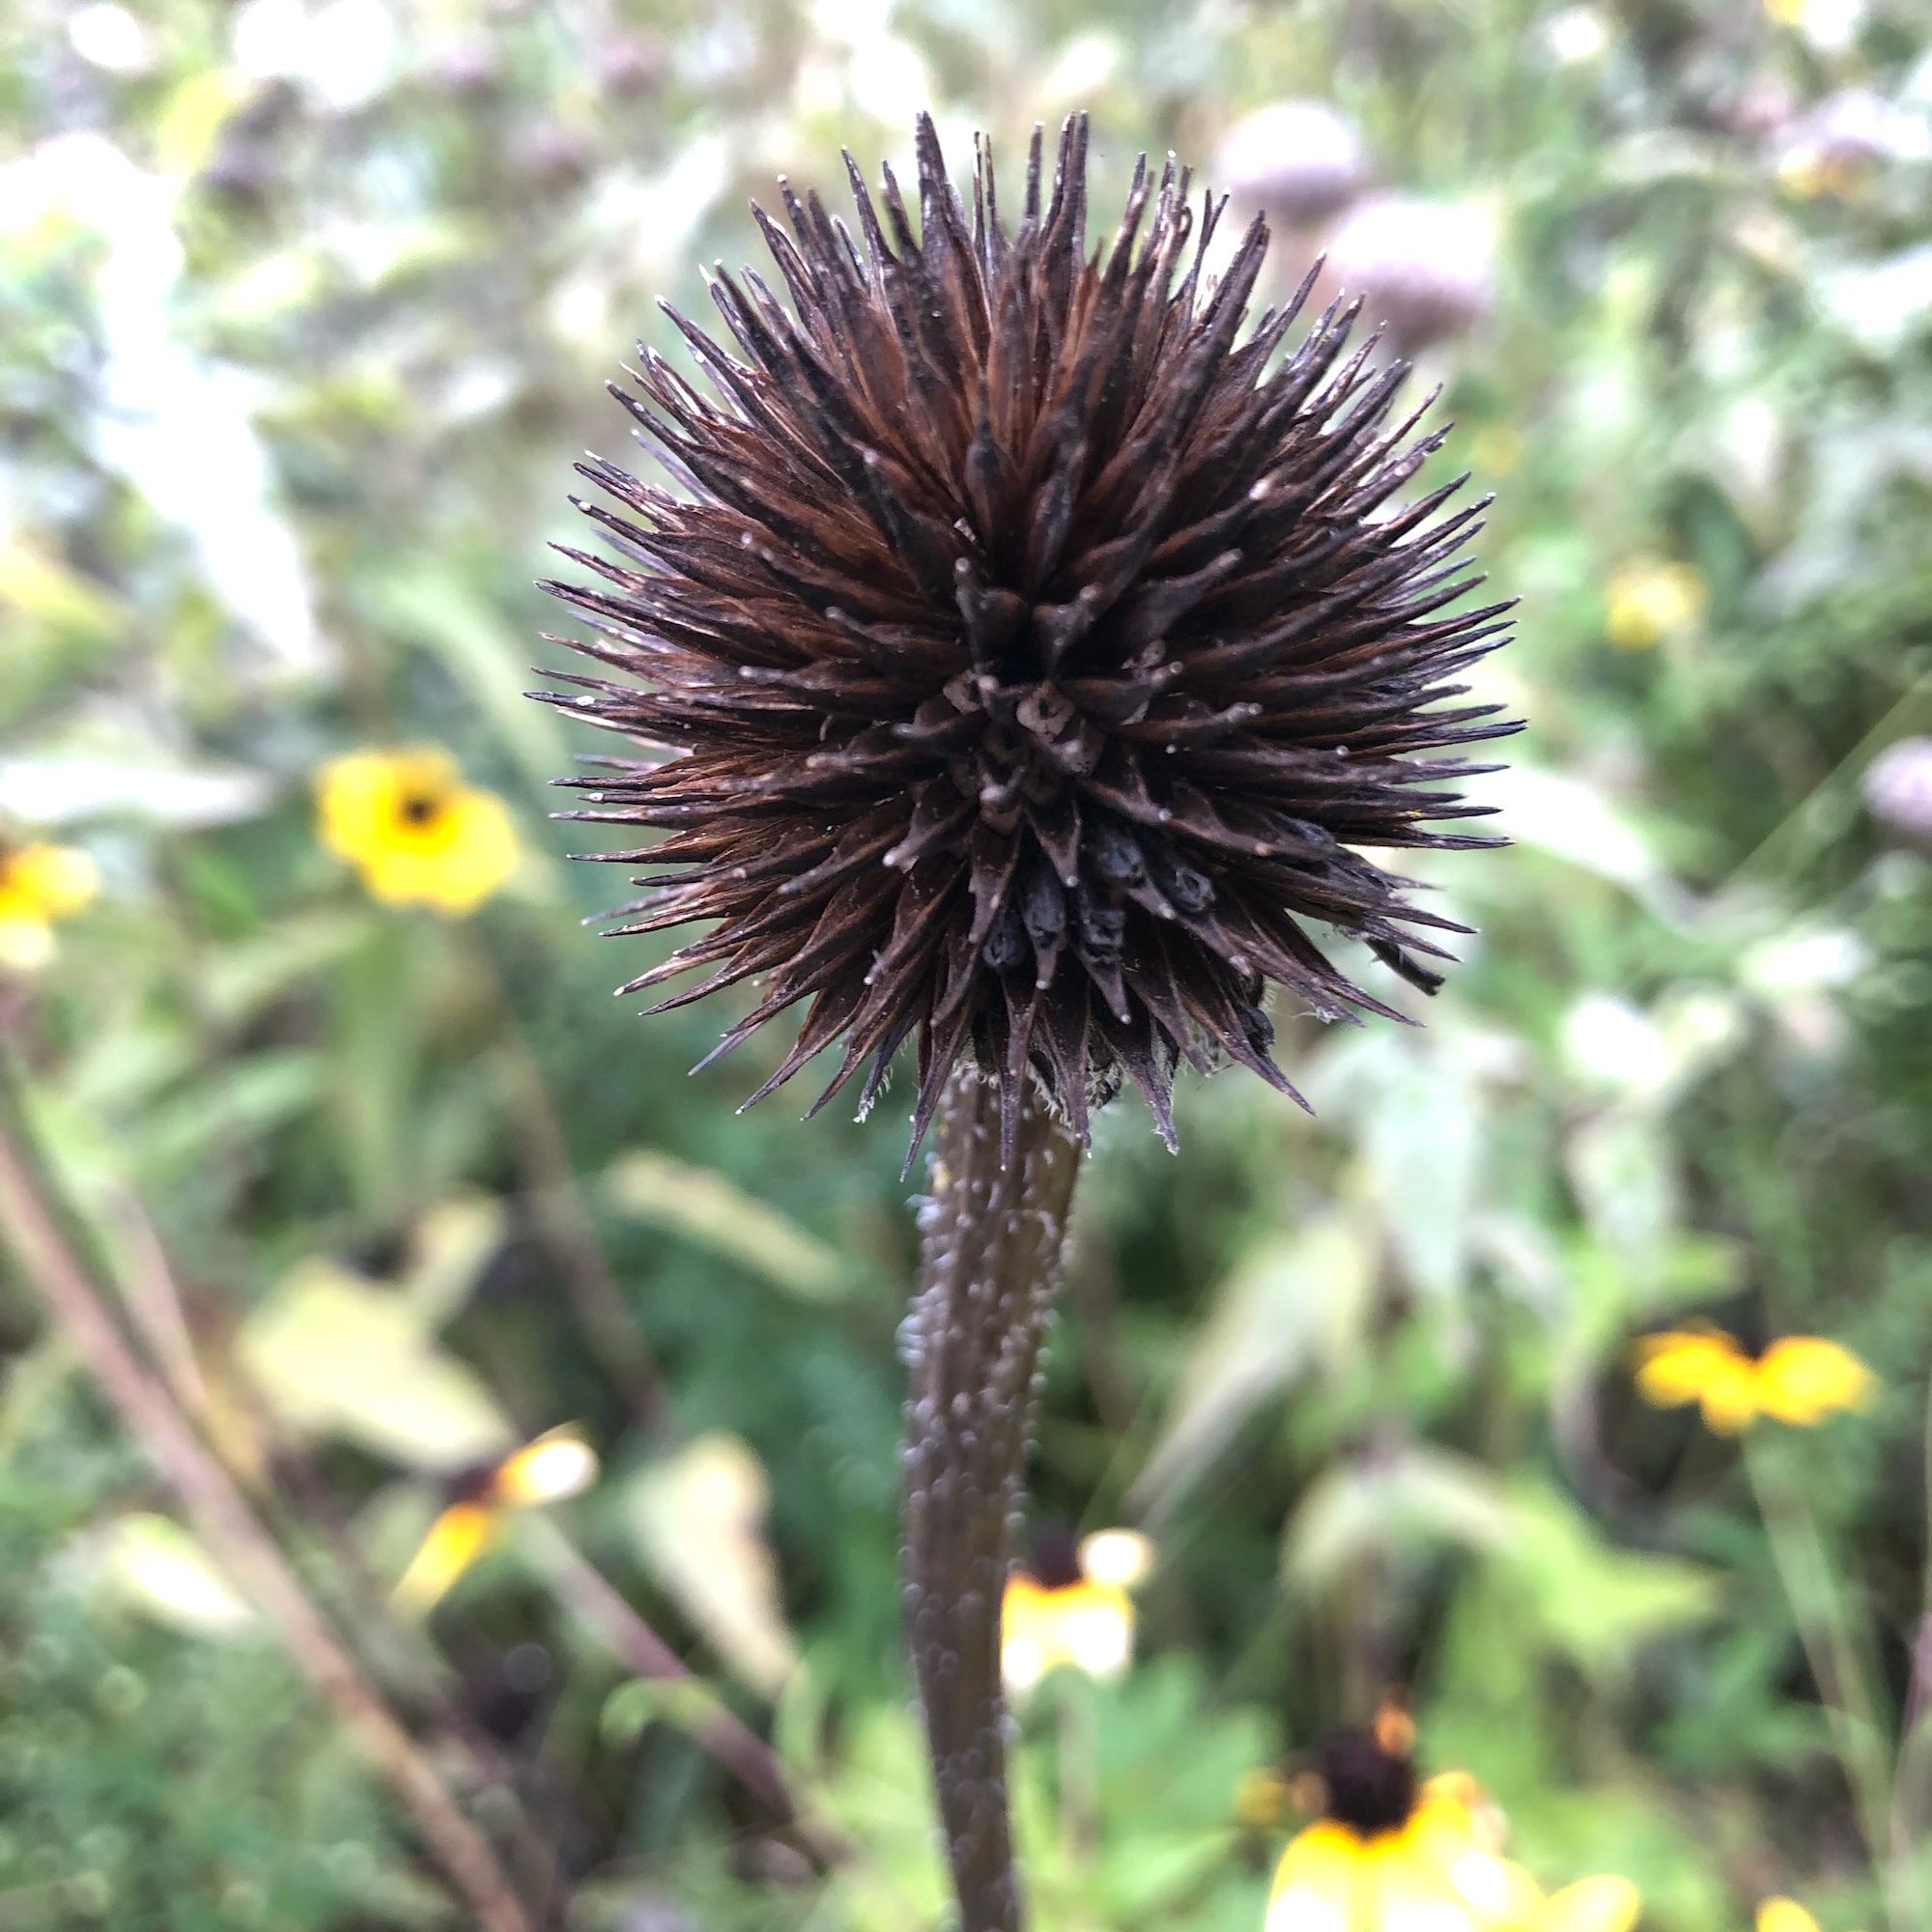 Pale purple coneflower seed pod on bank of Retaining Pond on corner of Nakoma Road and Manitou Way on  September 8, 2019.